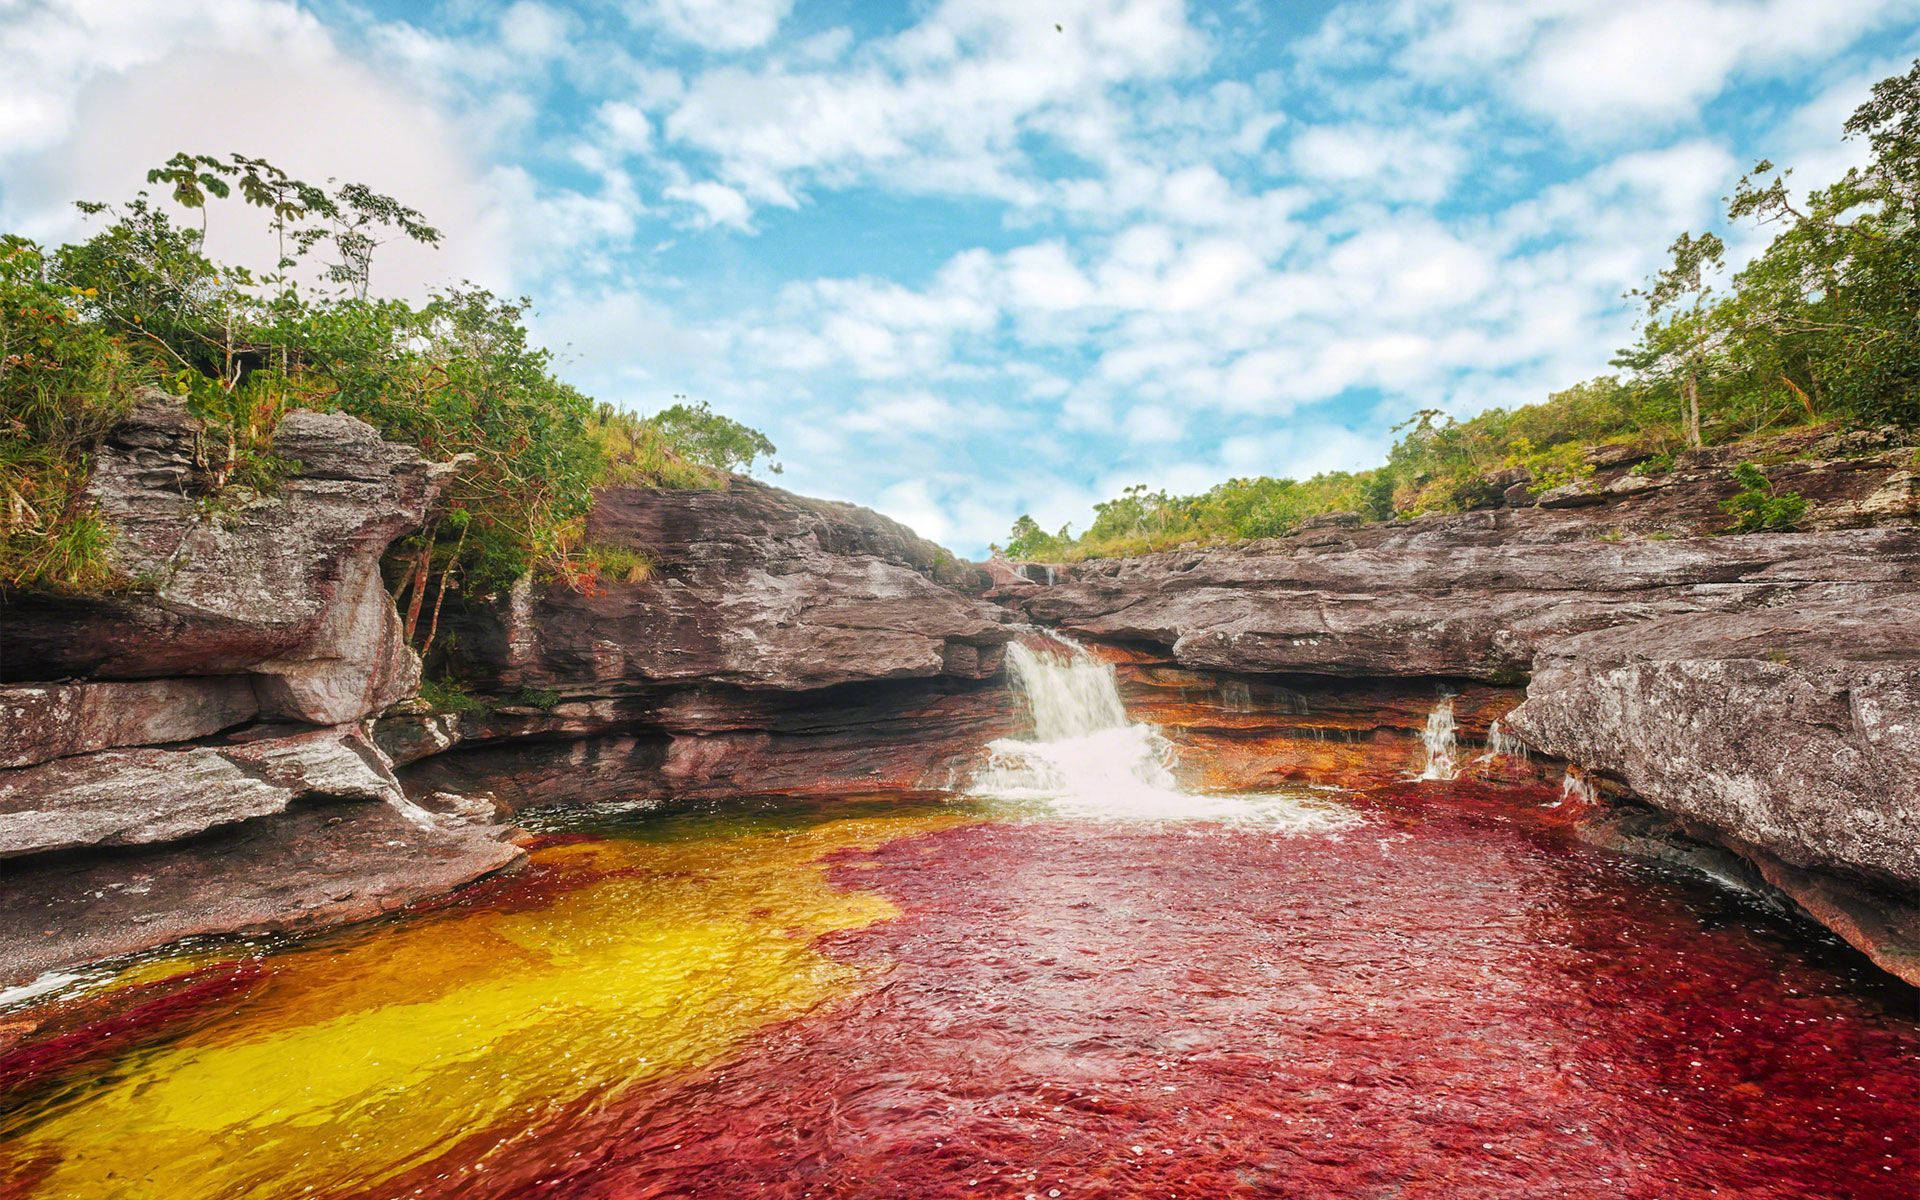 Caption: Breathtaking View Of Cano Cristales, The River Of Five Colors, In Colombia Background